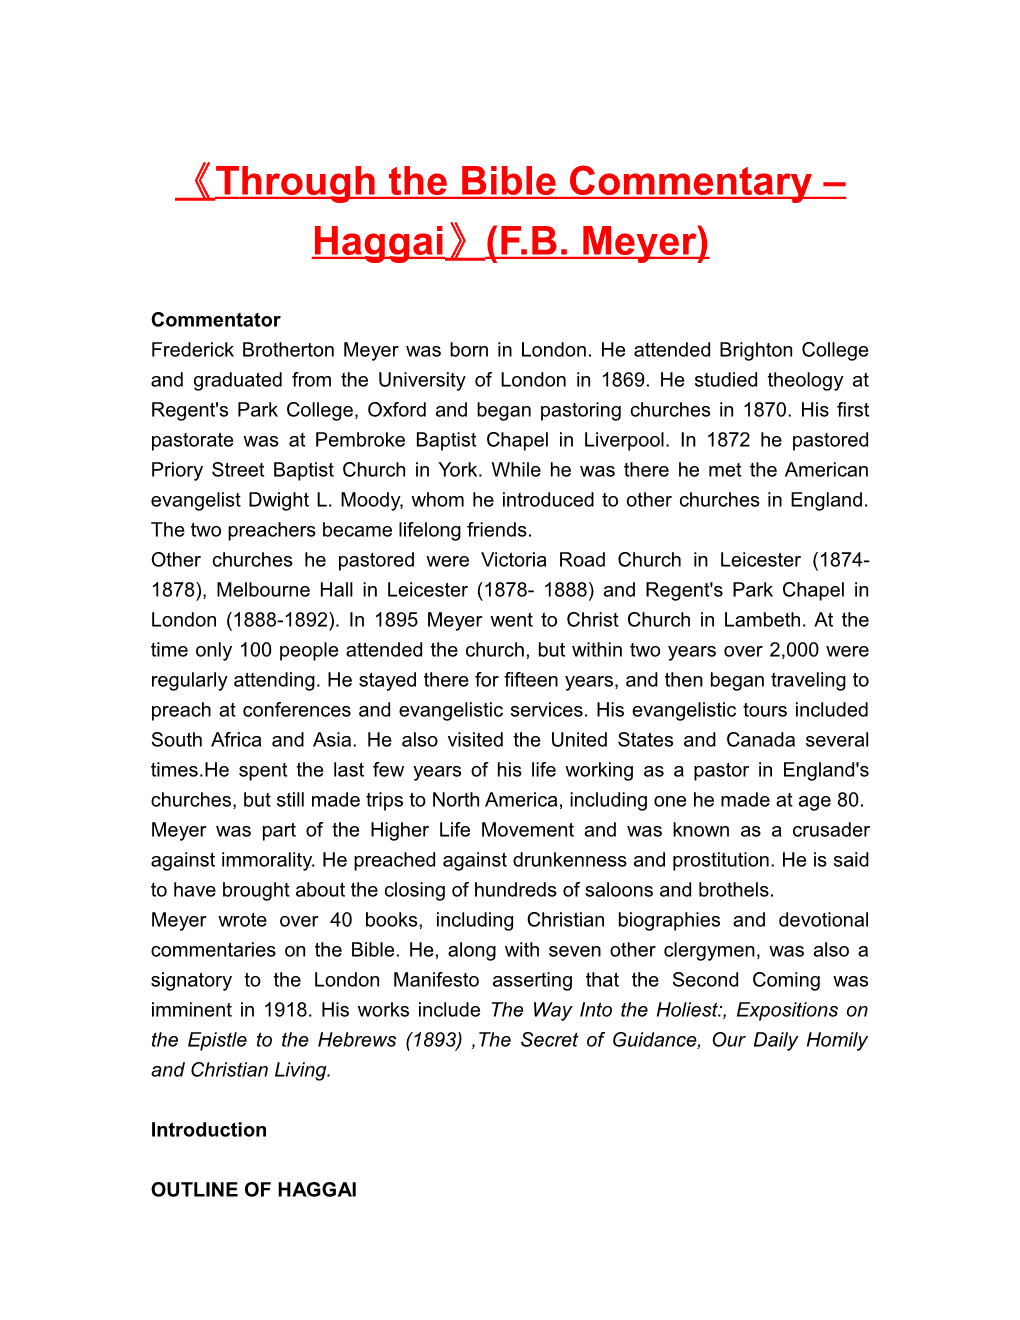 Through the Bible Commentary Haggai (F.B. Meyer)